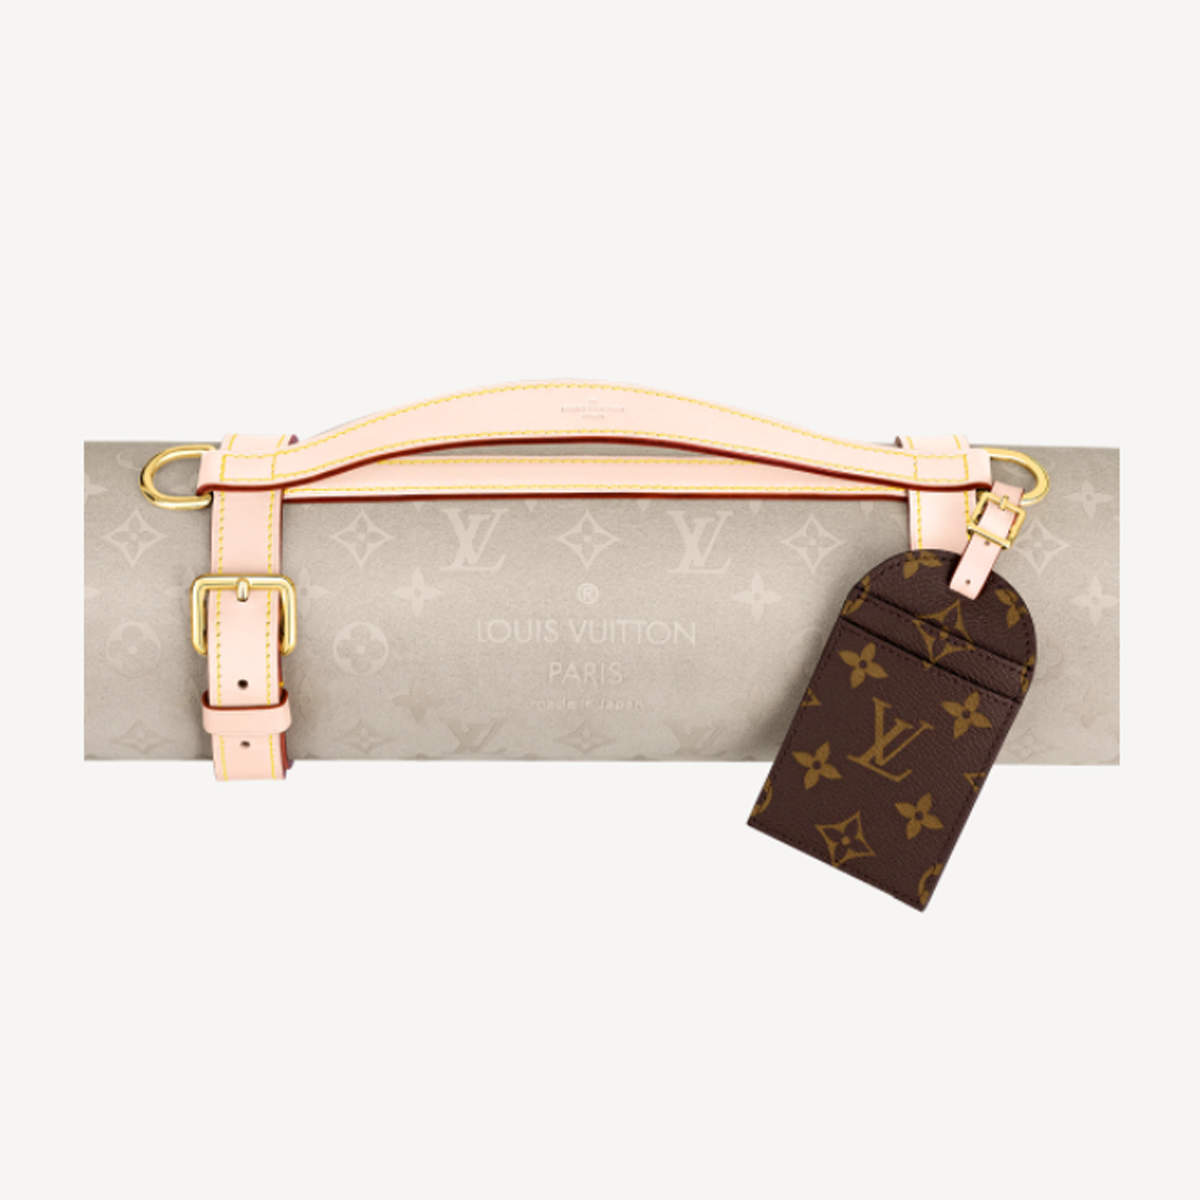 Louis Vuitton Yoga Mat Price: People not happy with Louis